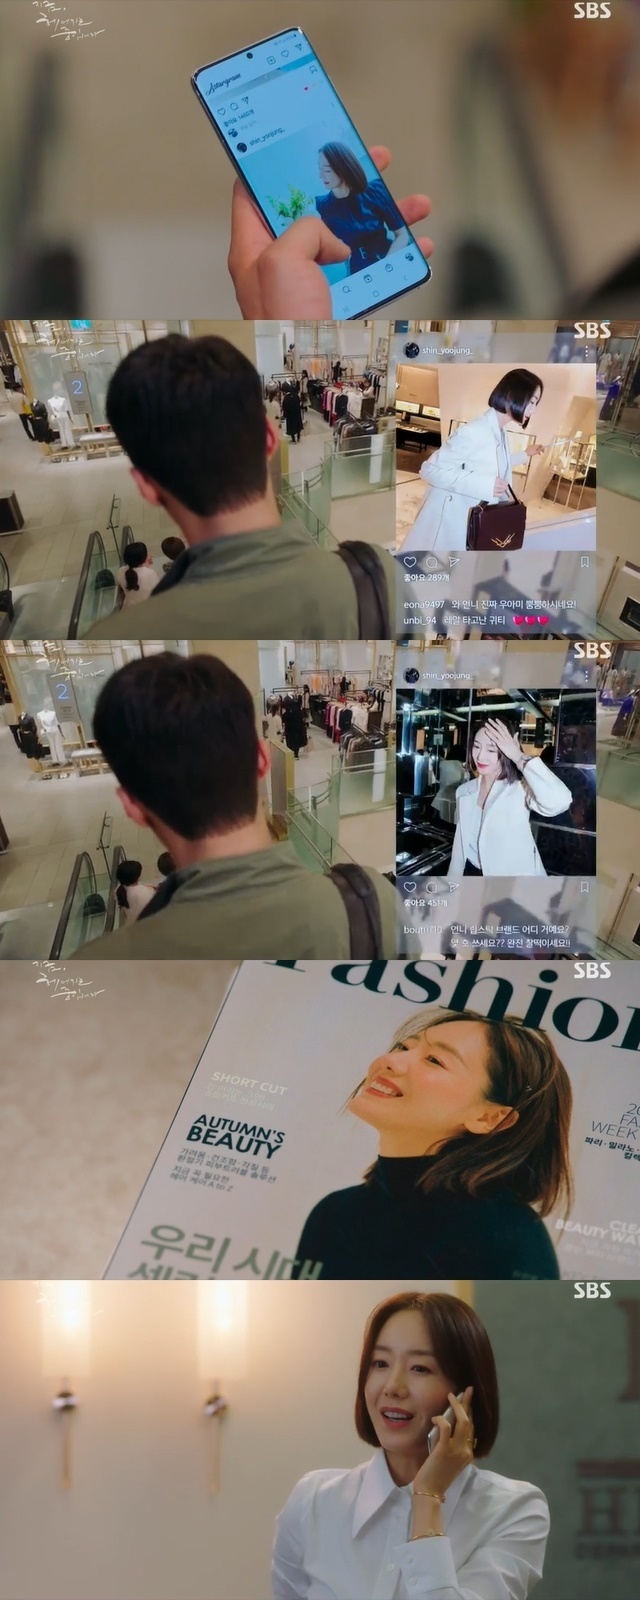 Yoon Jin-hee first appeared as a chaebol male and female reader and influencer with 600,000 followers.In the second episode of SBS gilt drama Now, We Are Breaking Up (playplay by Jane the Virgin, directed by Lee Gil-bok), which was broadcast on November 13, Ha Young-eun (Song Hye-kyo), who is looking for a next-generation book, was portrayed in the gang of influencer Seo Hye-lin (Yura Boon).On this day, Ha Young-eun invited the influencer Seo Hye-lin to promote the 30th anniversary of the Duwon, but Seo Hye-lin demanded the modification of the clothes and friction occurred.Ha Young-eun instructed his subordinates to take over the Seo Hye-lin.However, it was not easy to get out of the cellar, which was unpleasant because it was a solder, the cellar that had already been scheduled, and the cellar that demanded excessive conditions.At this time, Ha Young-eun looked at the magazine next to him and recalled the only daughter of the Hills Group and the influencer Shin Yoo-jung.Ha Young-eun said, I know youre more likely not to. But Im going to do something good for the local Brands.My heart will bring me a fluke, he said.Shin Yoo-jung, who not only is SNS Celeb but also is the managing director of Hills Department Store, is in a difficult situation to contact directly. Yoon Jae-guk (Jang Ki-yong), who watched Ha Young-eun from the side, stepped up.Yoon Jae-guk asked Shin Yoo-jung, who he usually knew, to attend.